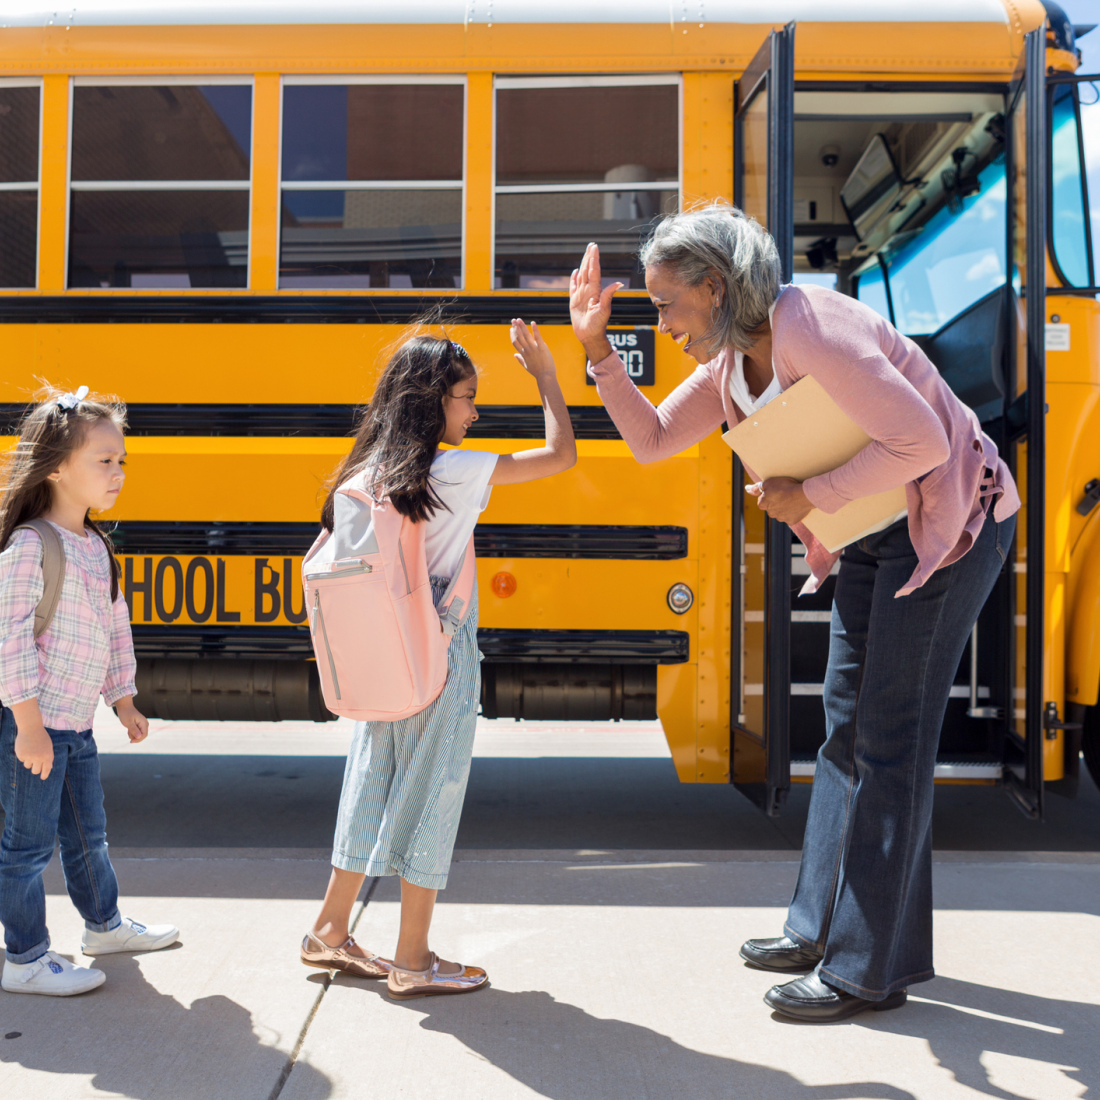 Adult woman educator high-fives elementary students as they get on the school bus.